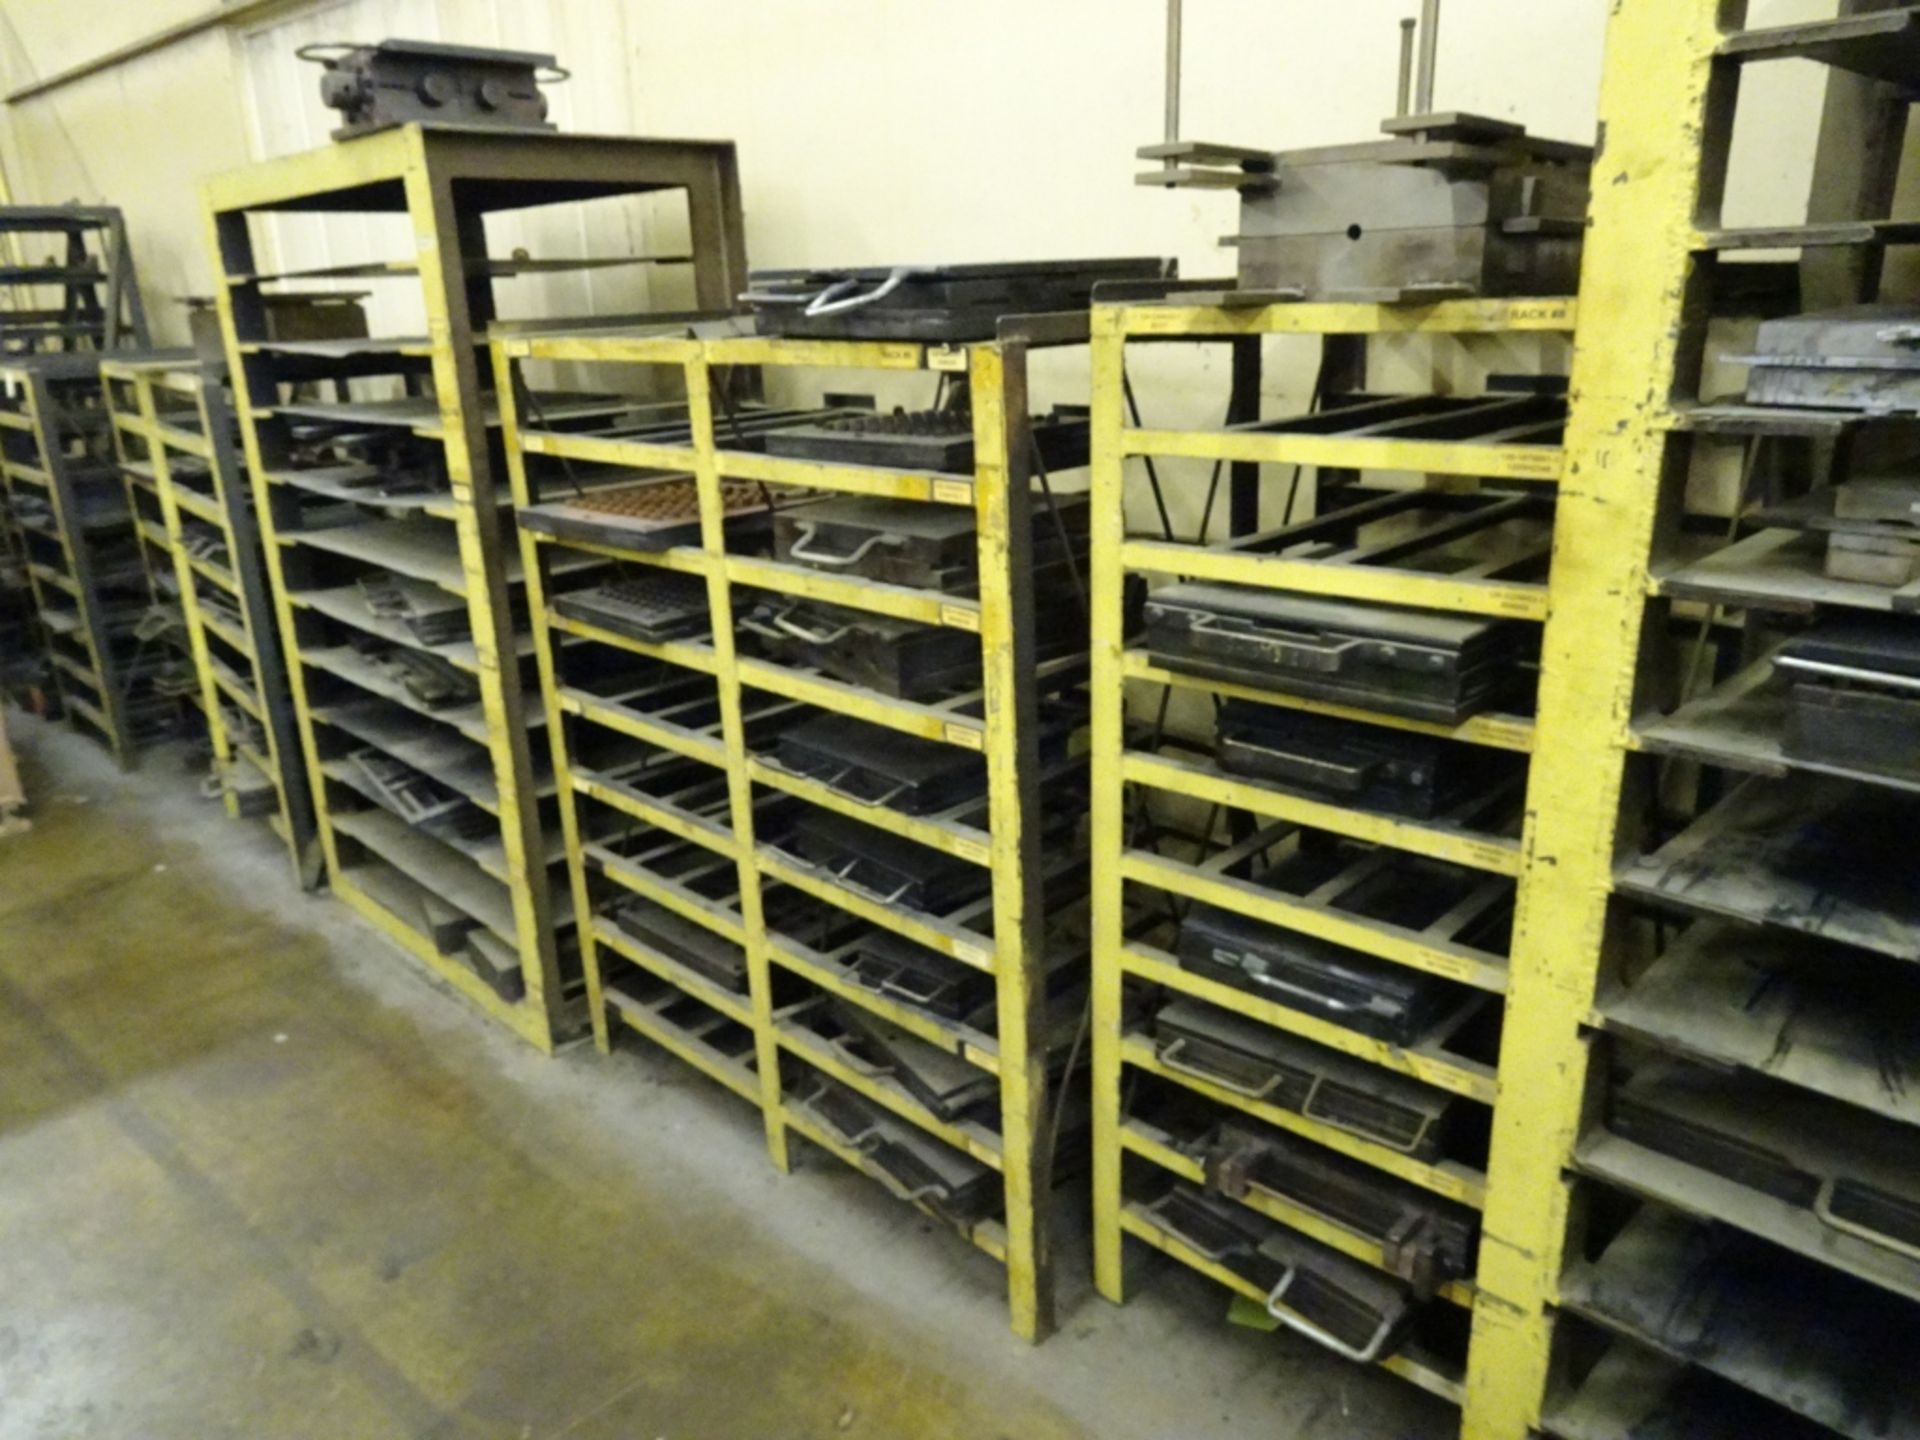 (14) Various Sized Heavy Duty Steel Mold Racks With No Contents - Image 6 of 6